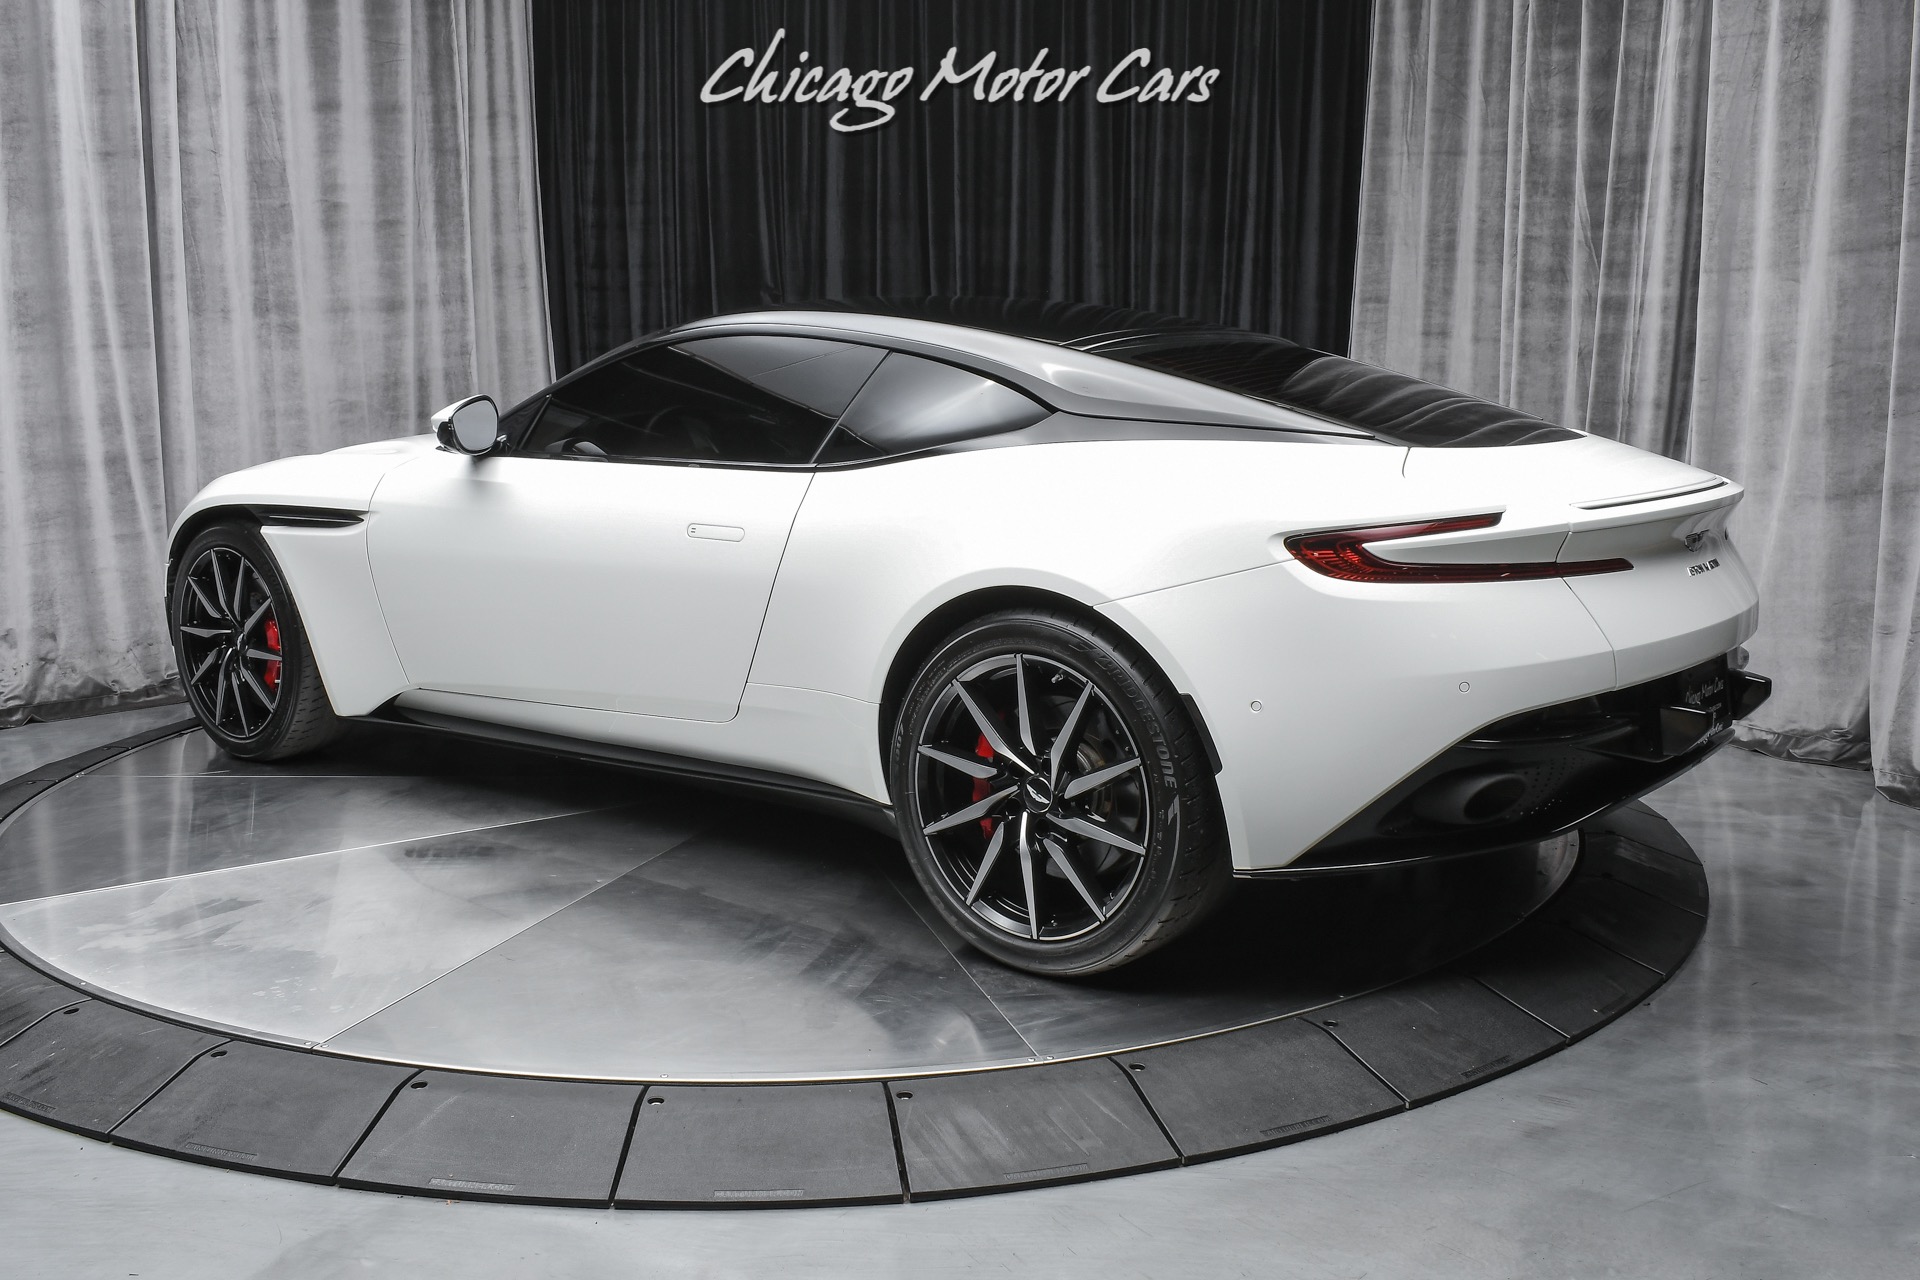 Used-2018-Aston-Martin-DB11-V12-Coupe-MSRP-256K-TECH-PACK-ONLY-3550-MILES-LOADED